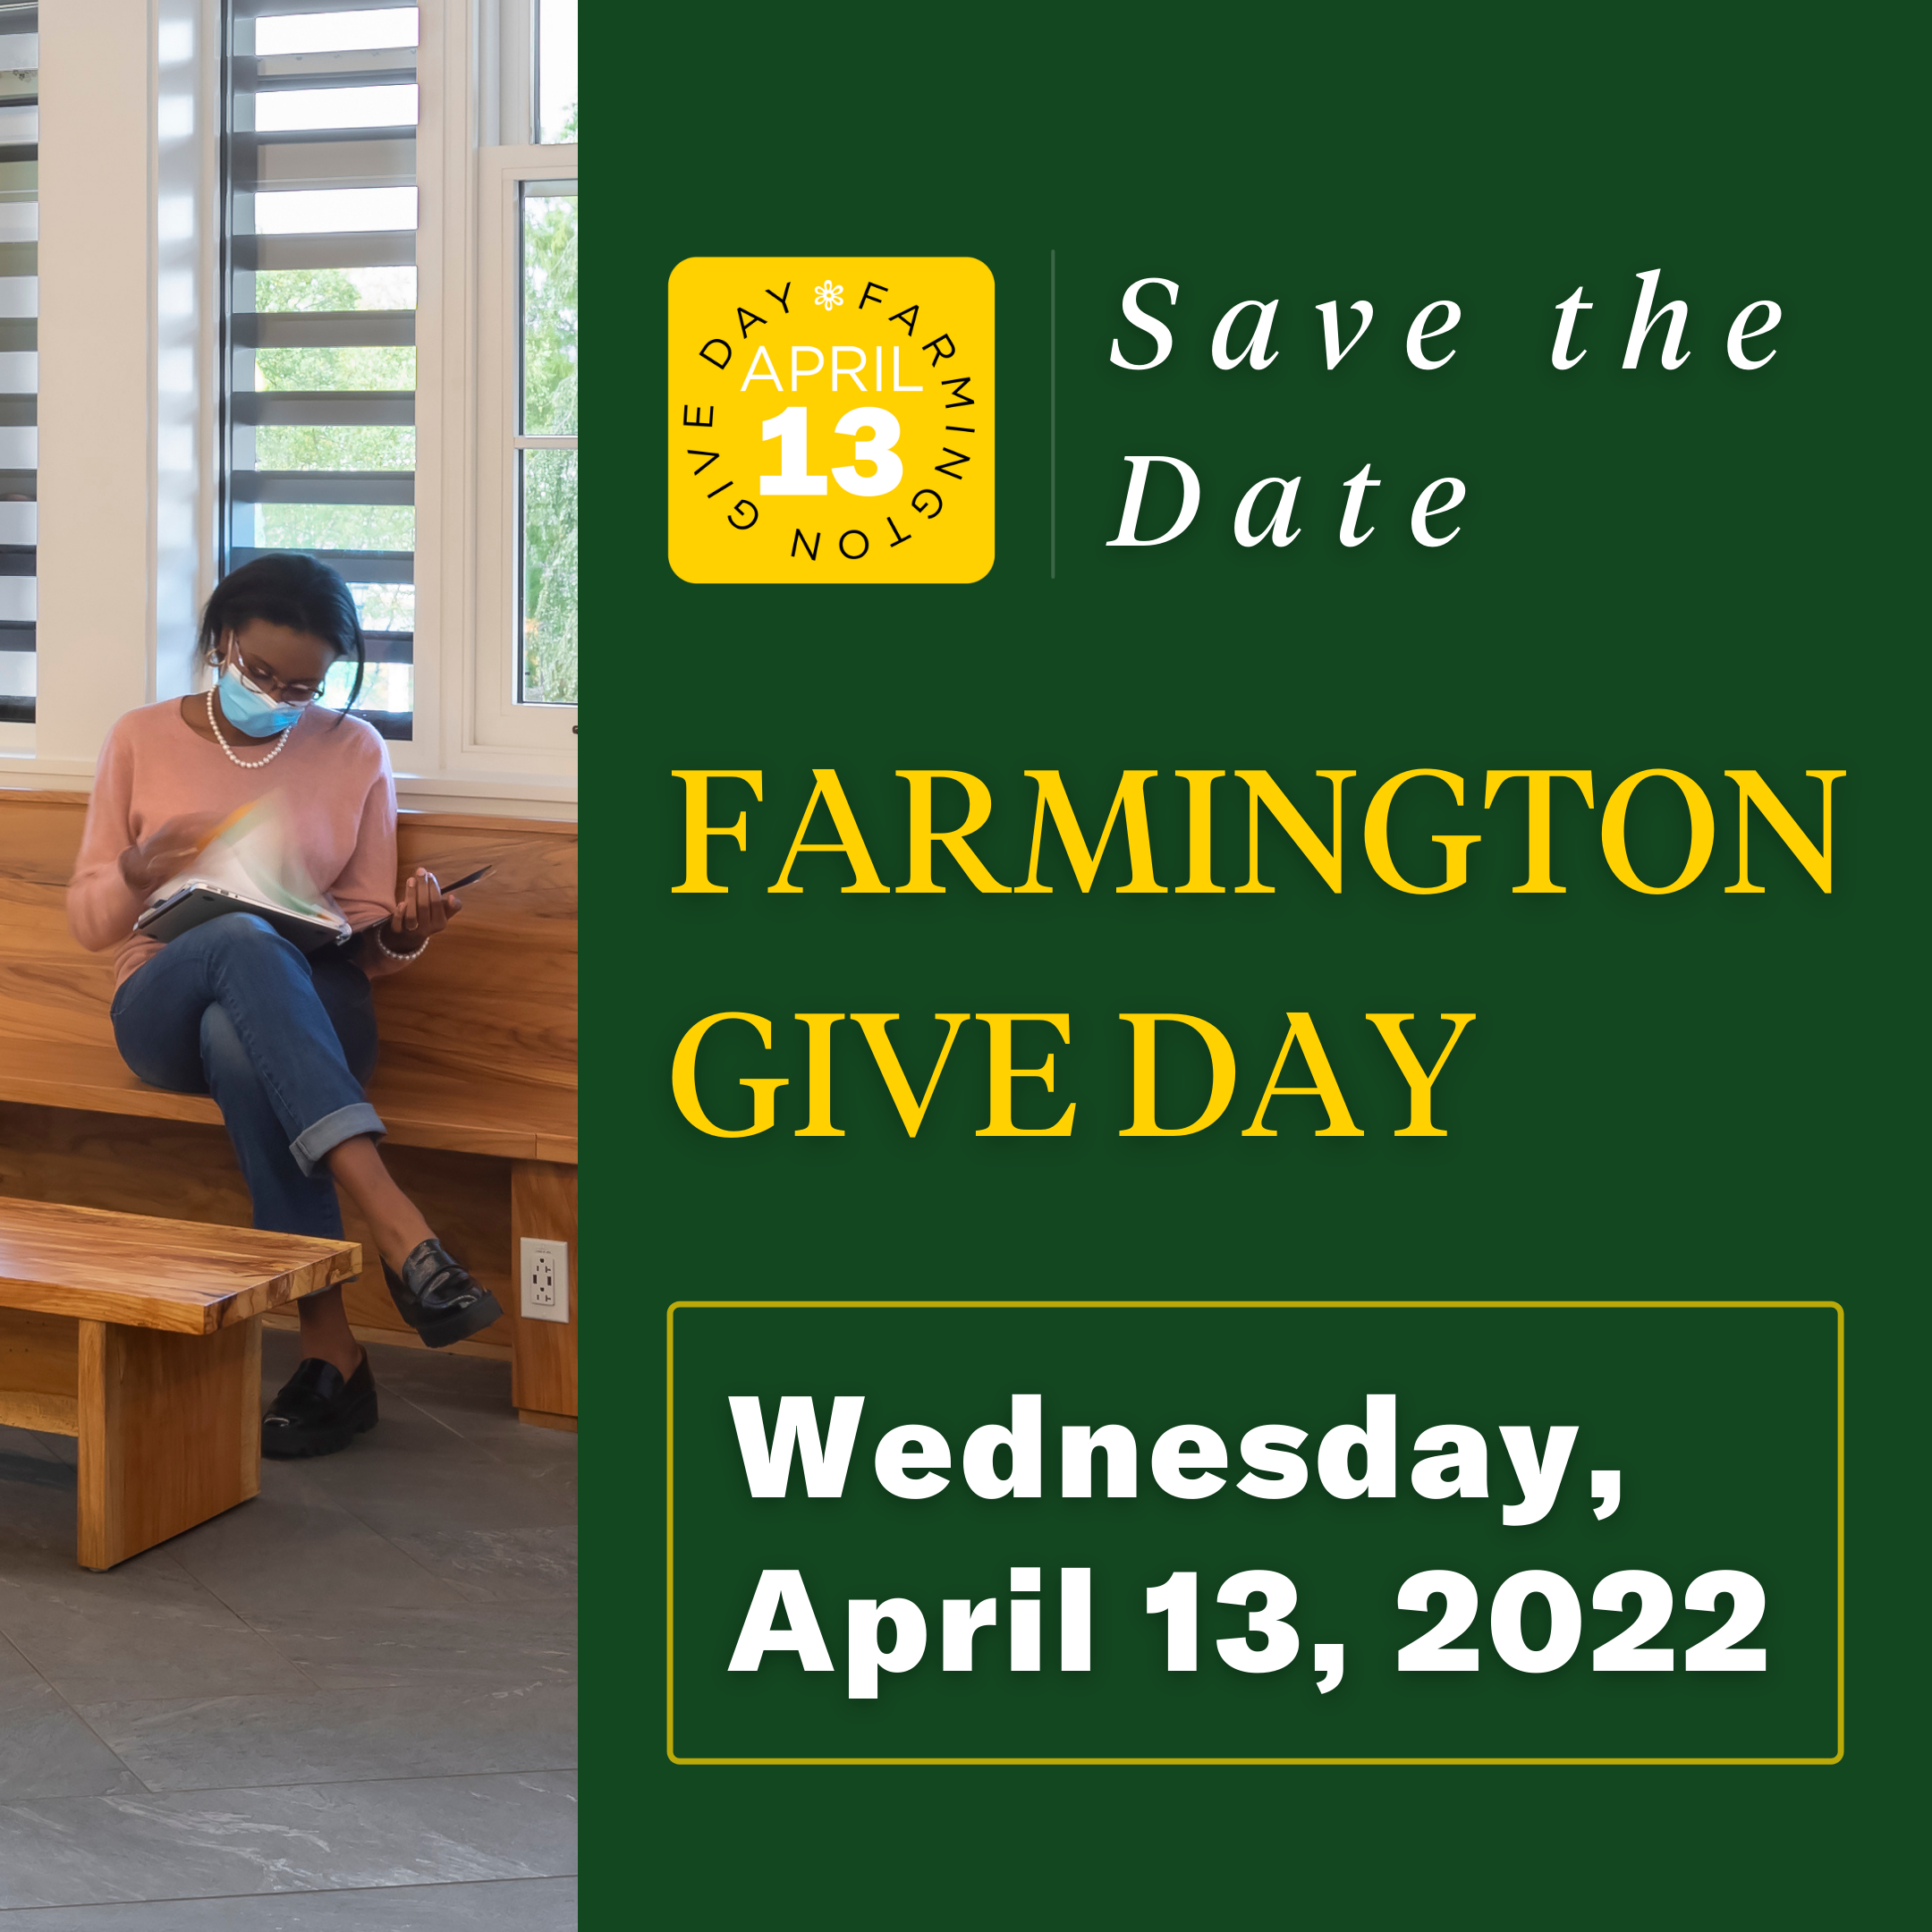 Save the Date for Farmington Give Day: April 13, 2022